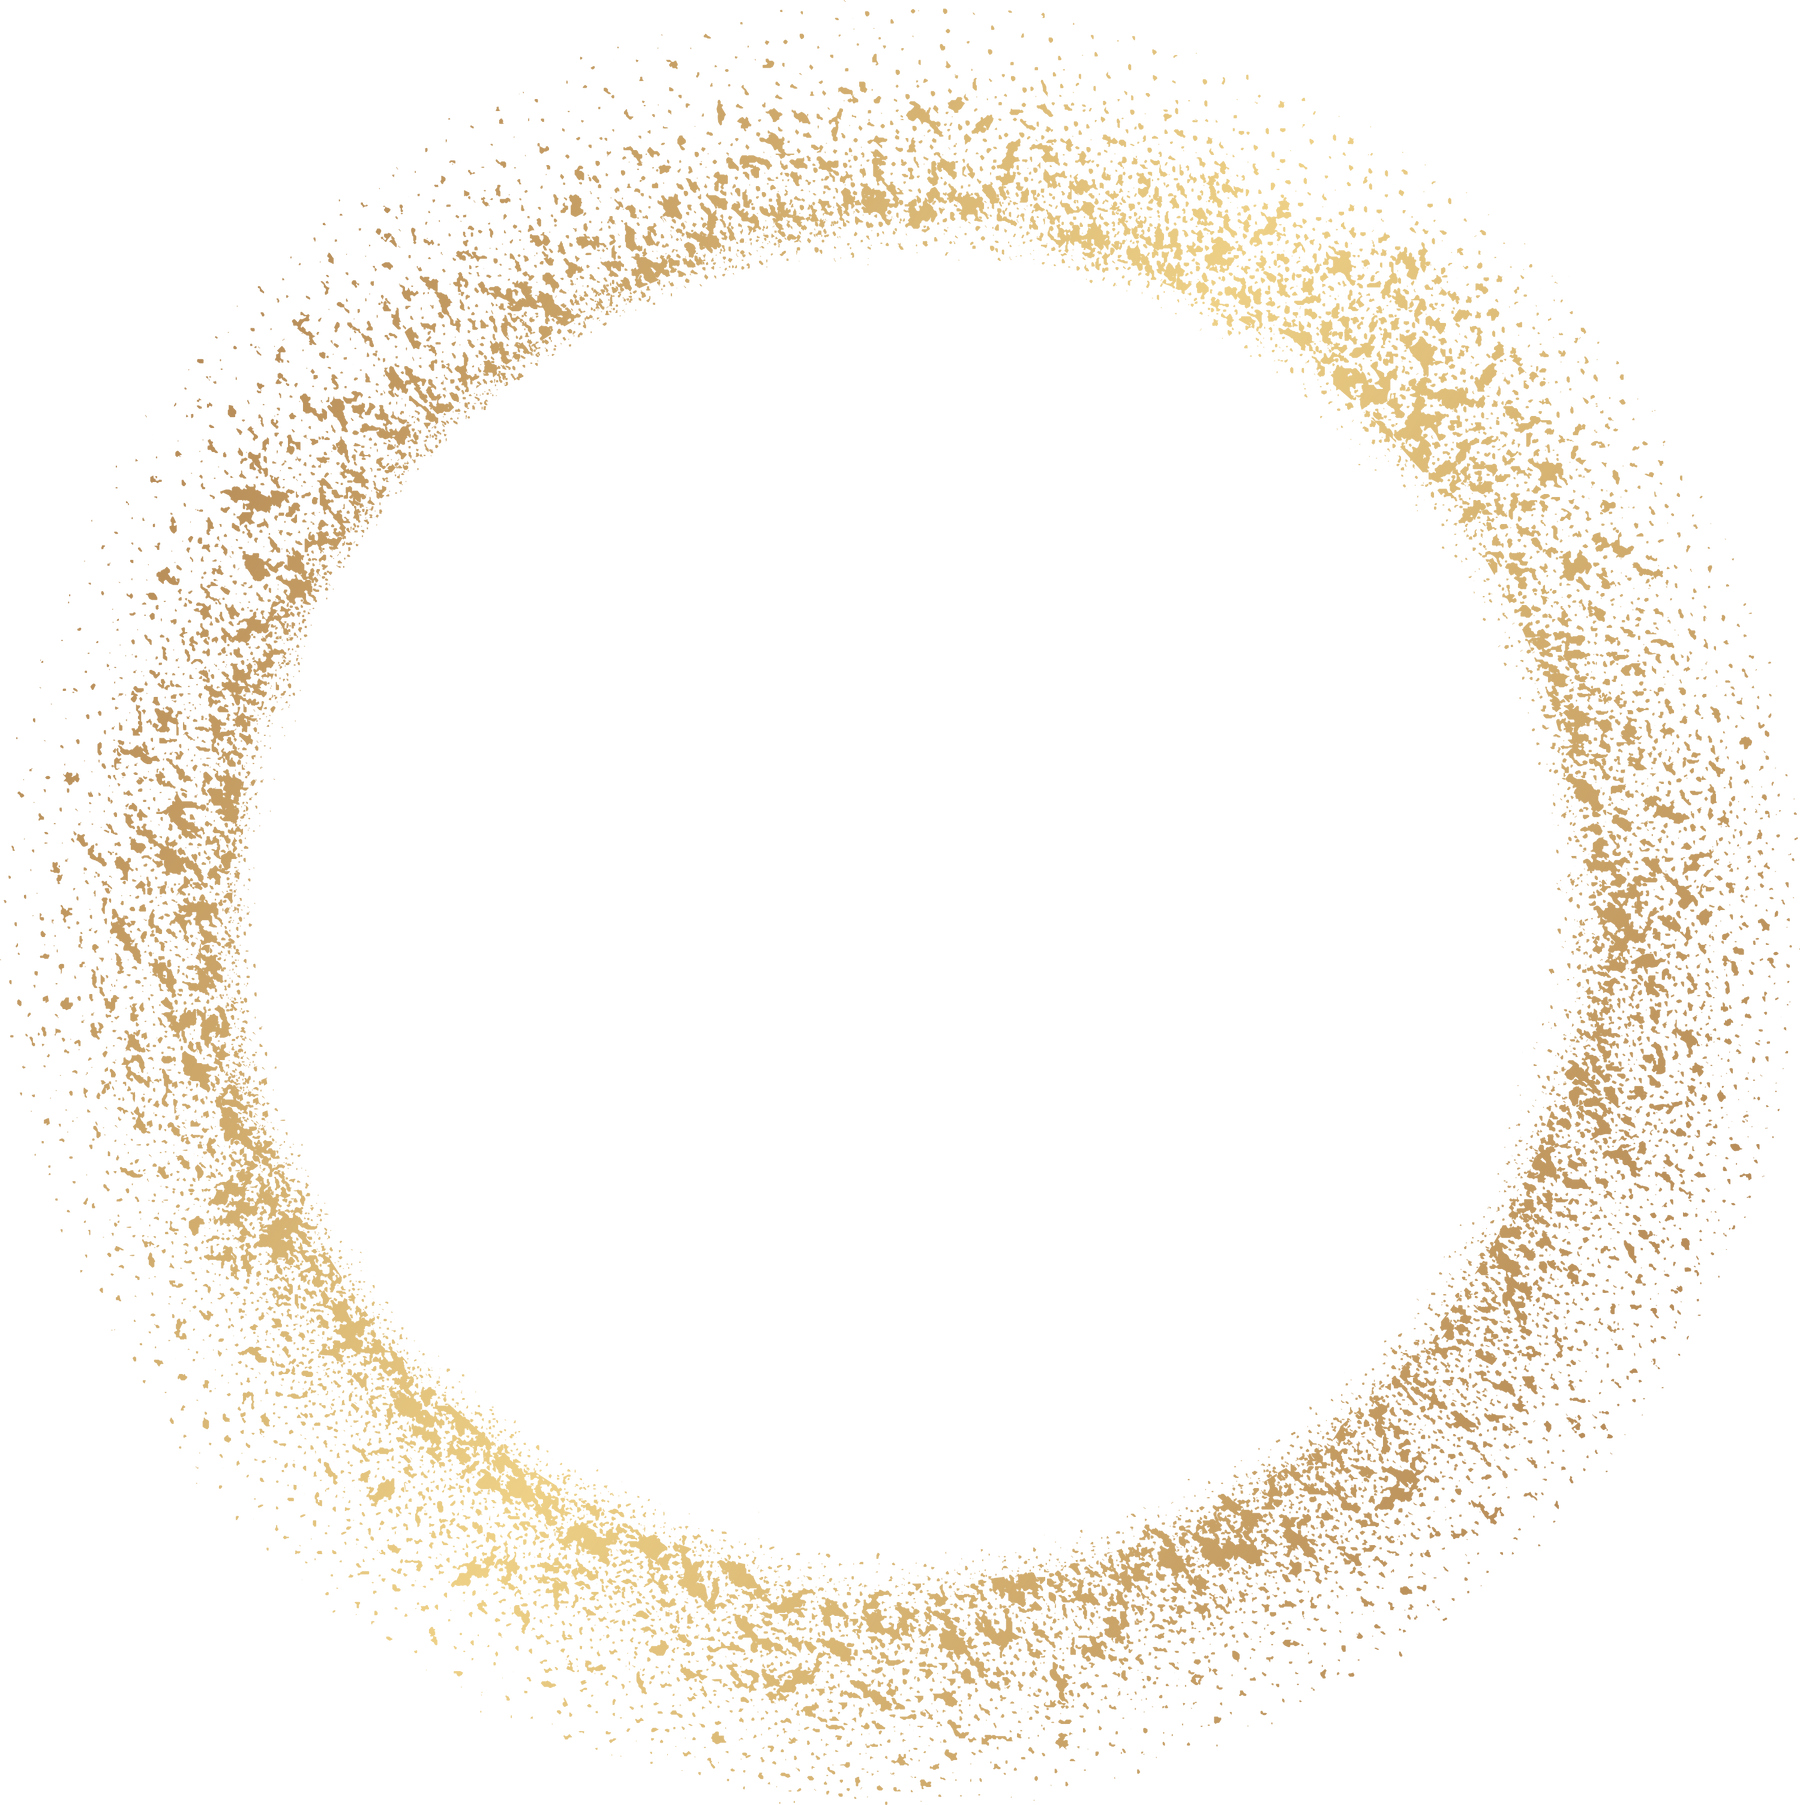 Gold reCircle gold fading boarder. Luxury golden fading circular with effect halftone. Elegant dot faded frames. Modern ring. Round fadew patterns. Delicate fades element for design print awardctangle border